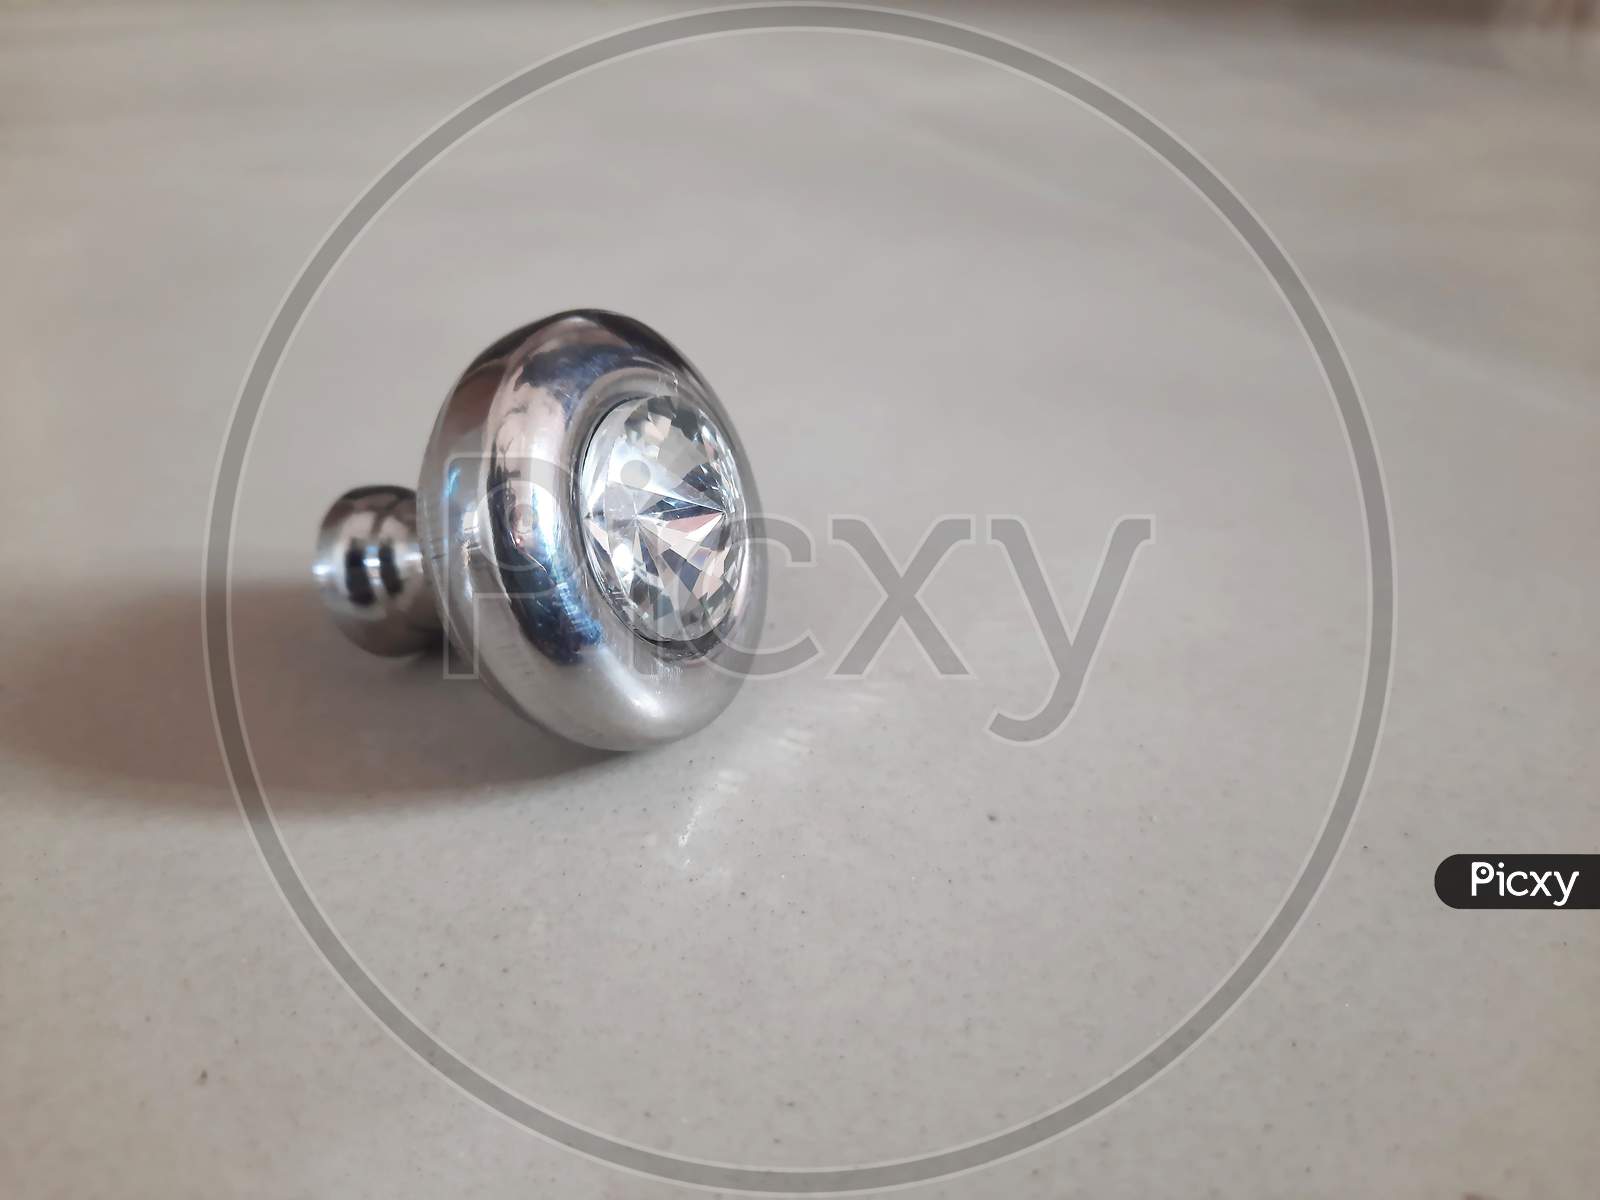 Circular Drawer Knob Design With Diamond In Stainless Steel Isolated On White